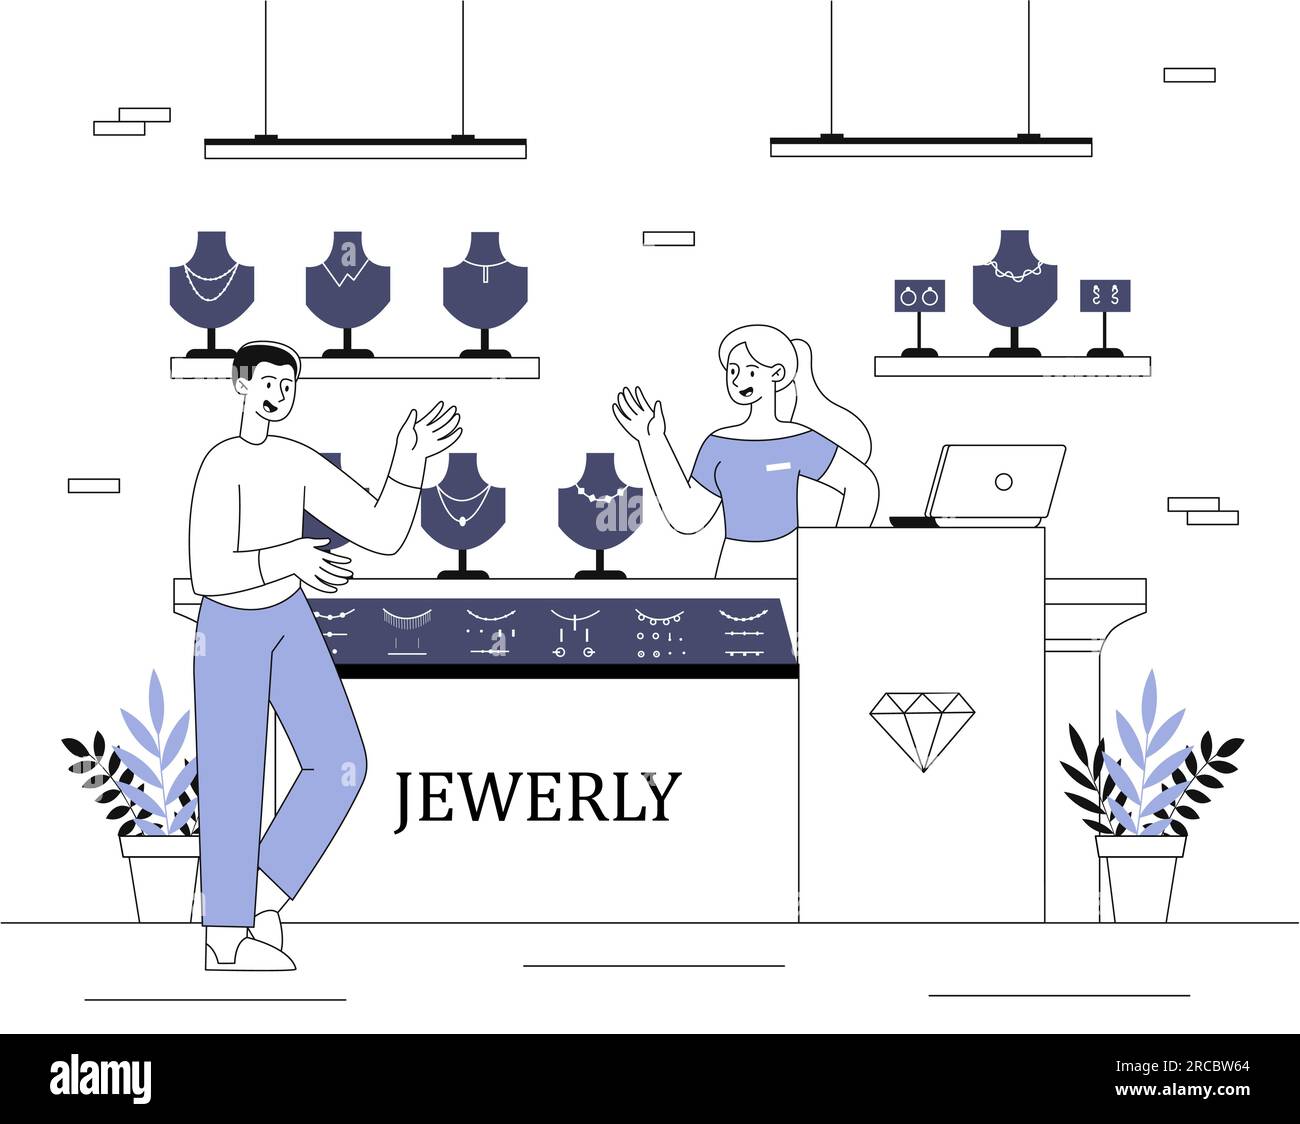 People in jewelry shop line concept Stock Vector